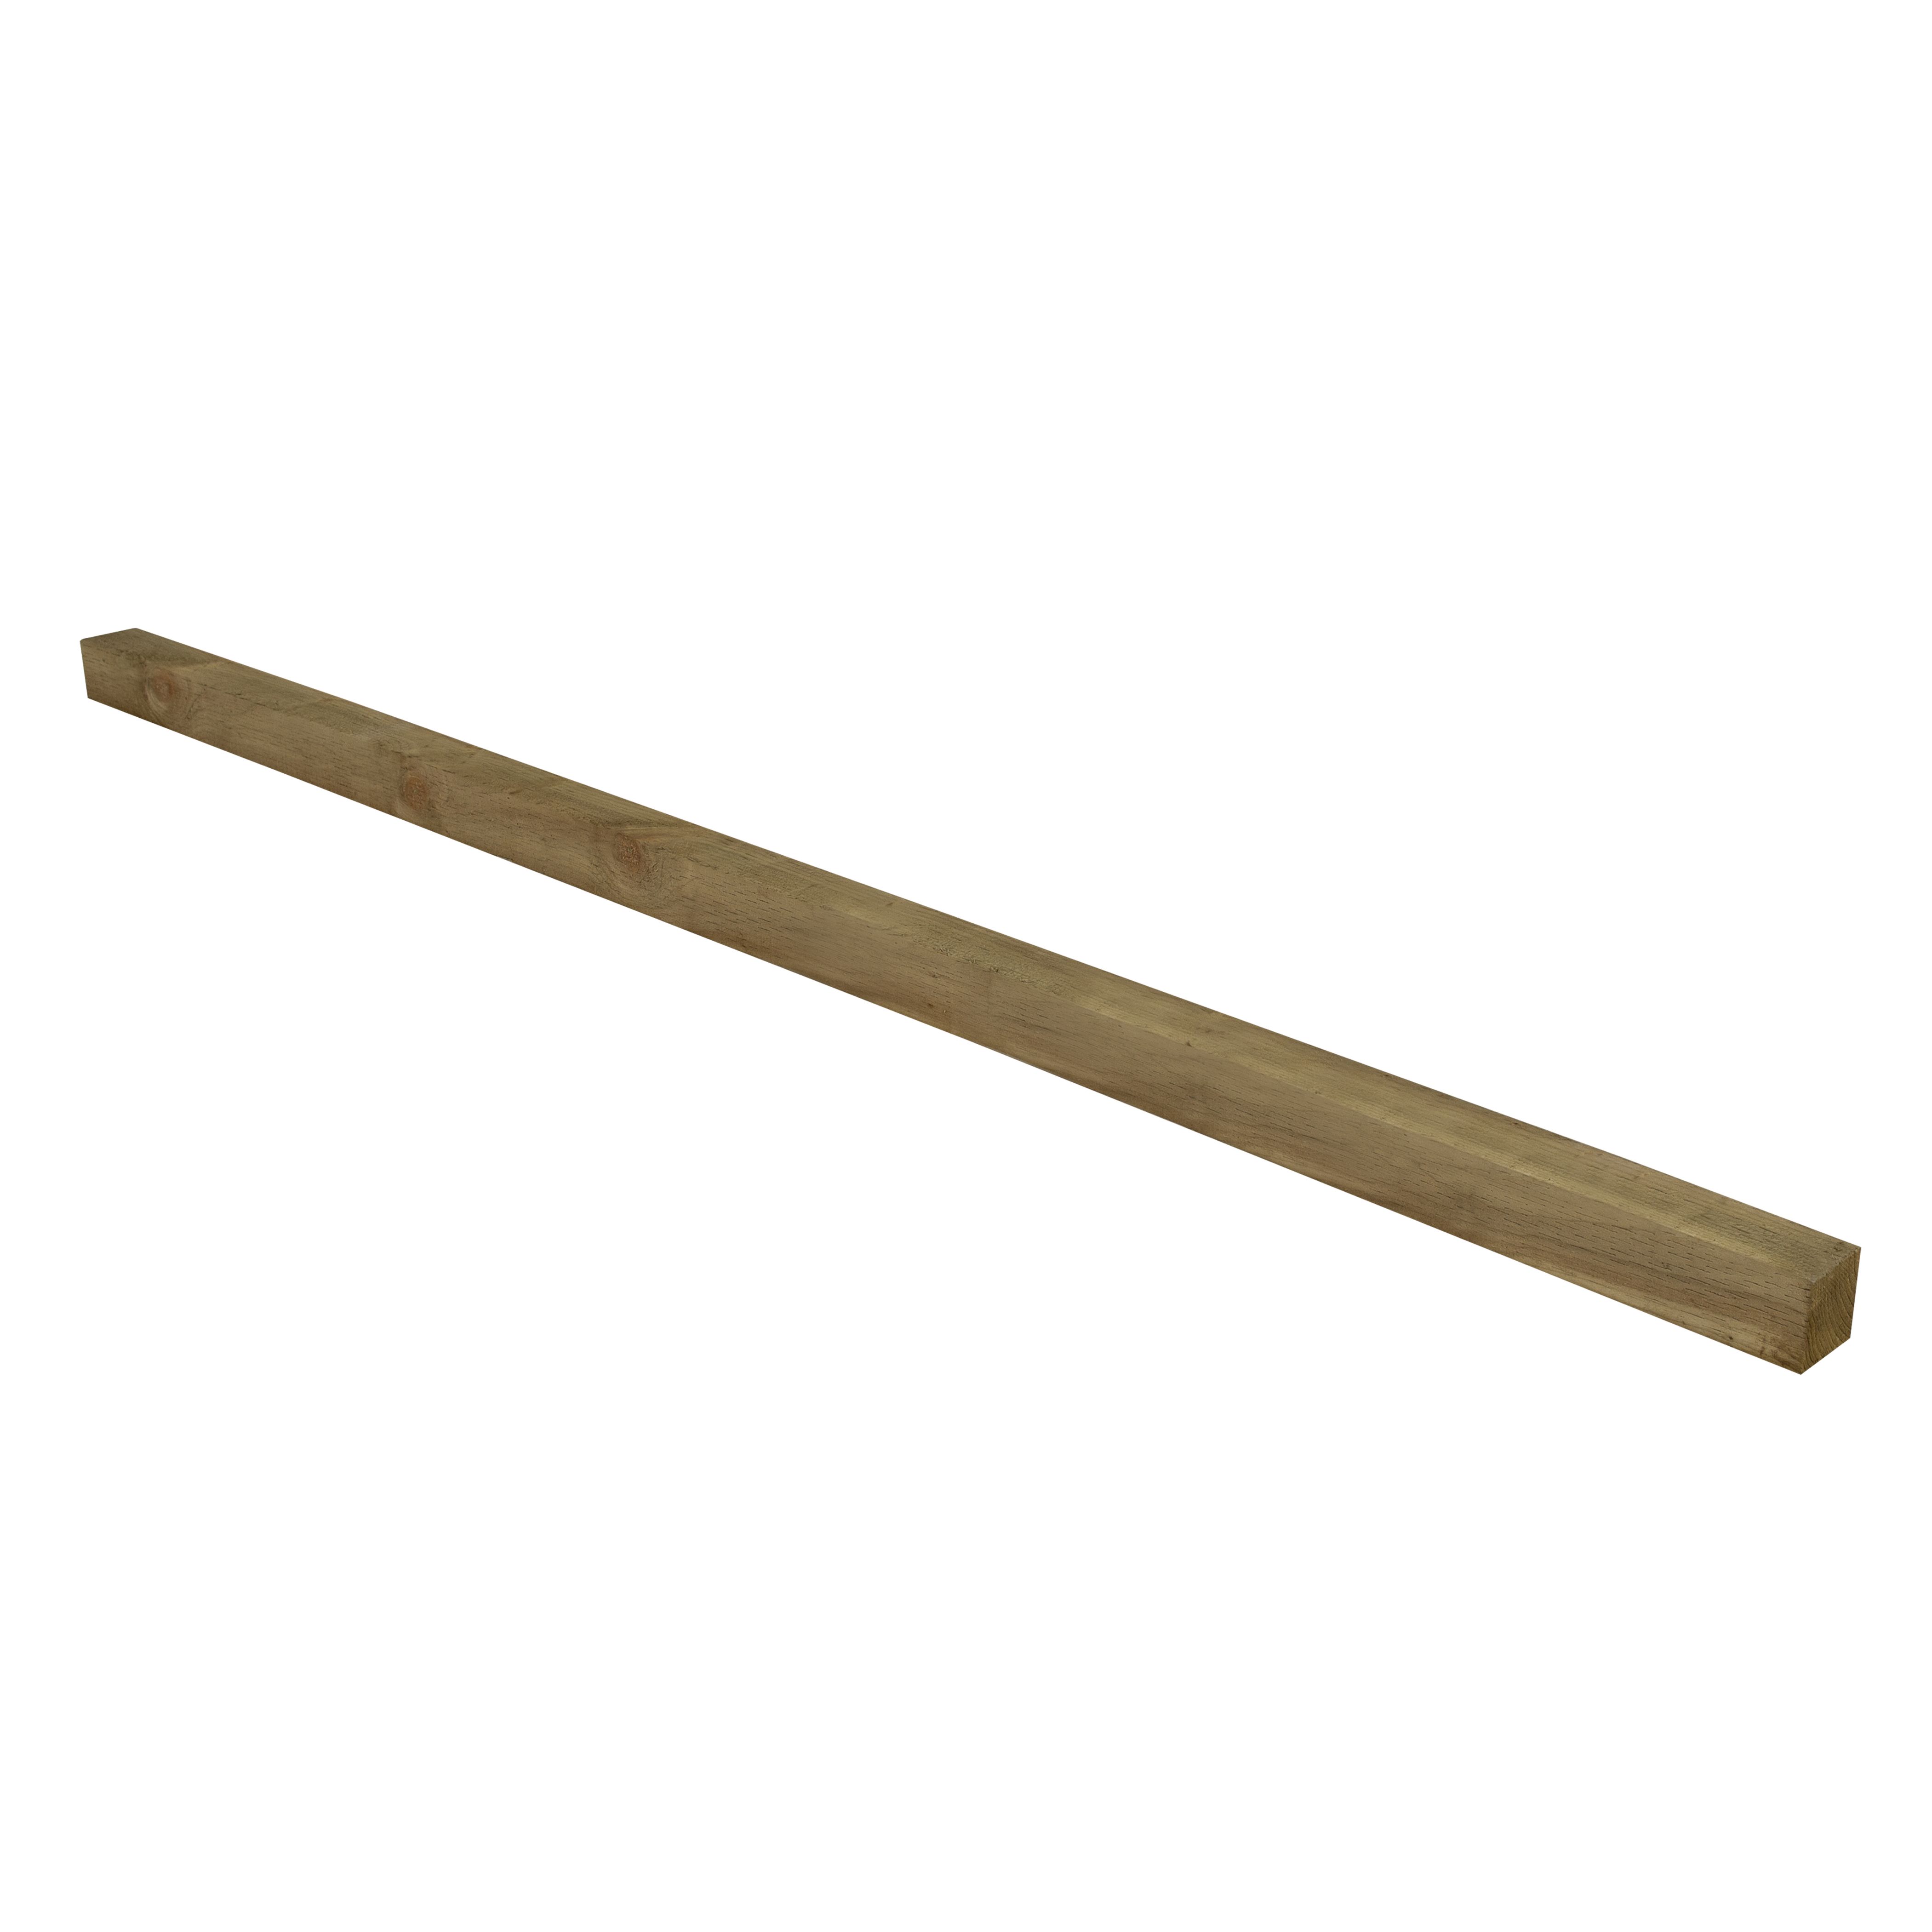 UC4 Green Square Wooden Fence post (H)2.4m (W)75mm, Pack of 3